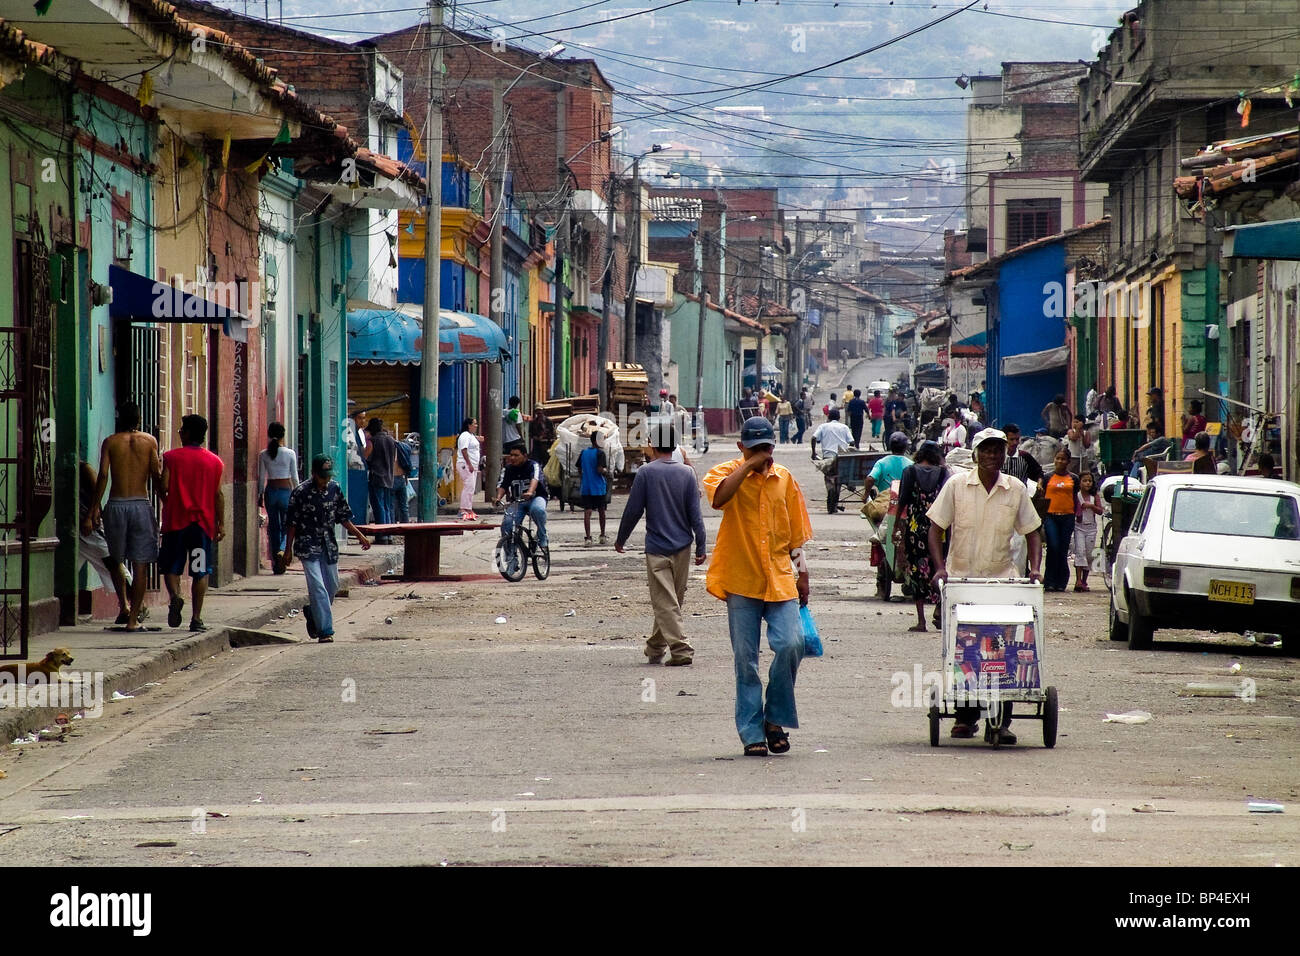 People passing along the main street in the slum of Calvario, Cali, Colombia. Stock Photo